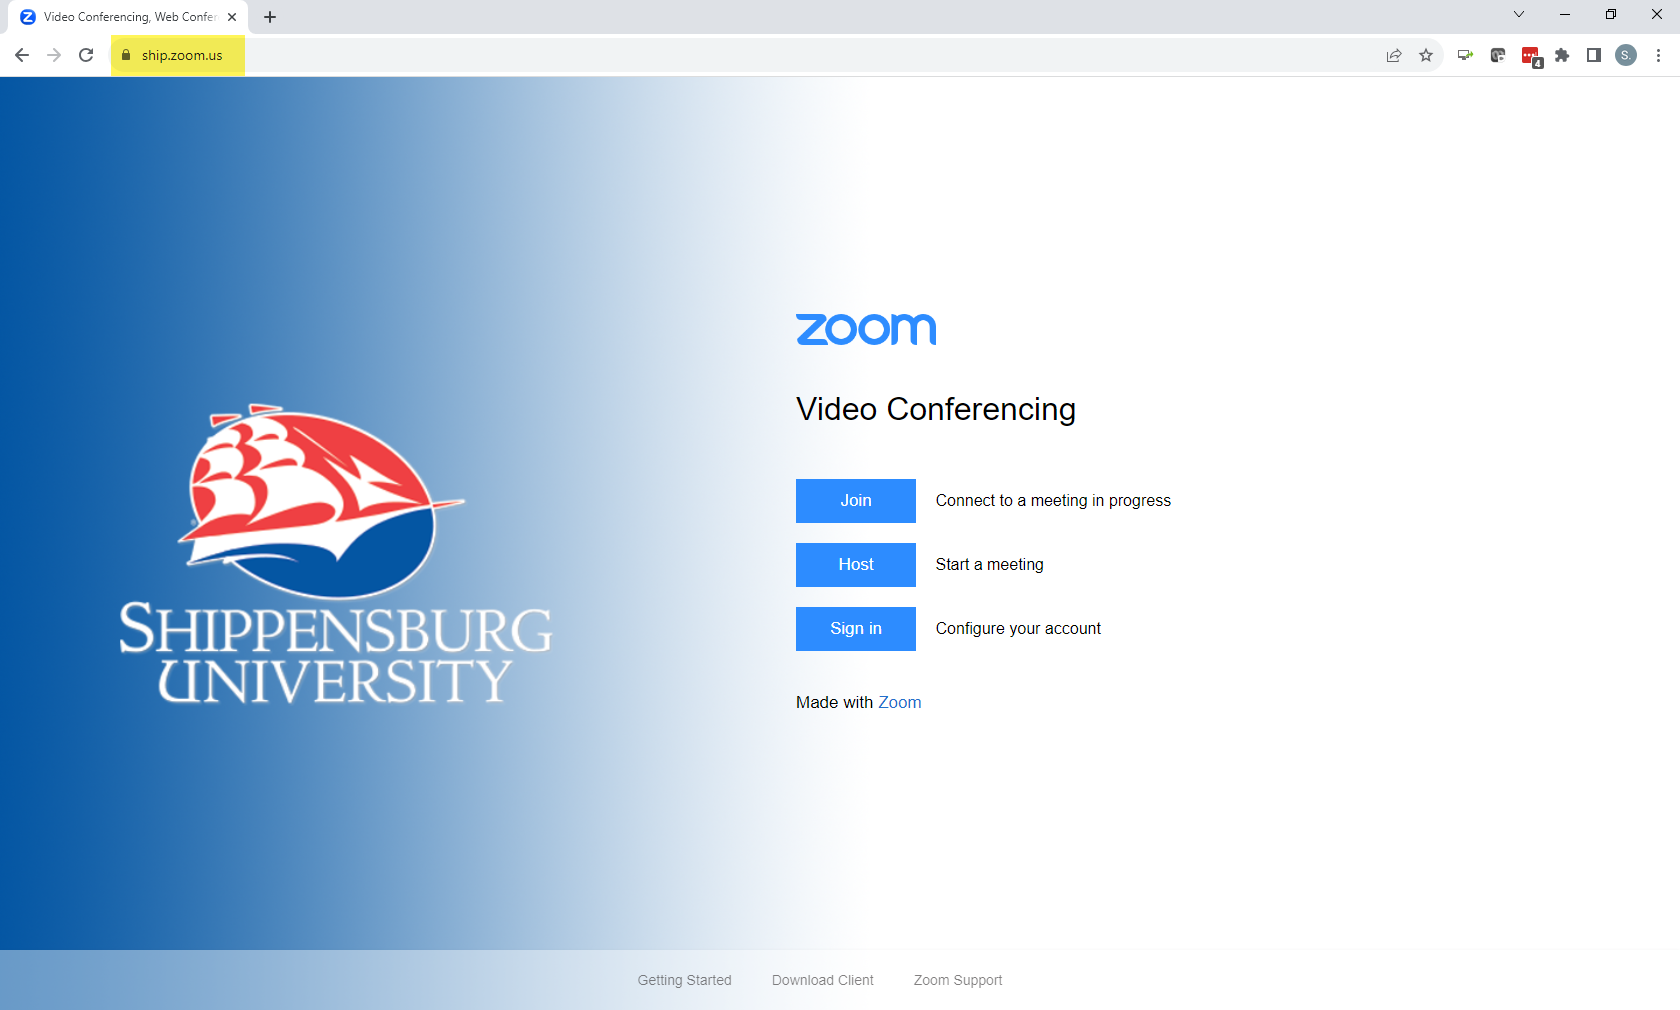 Open a web browser and navigate to ship.zoom.us